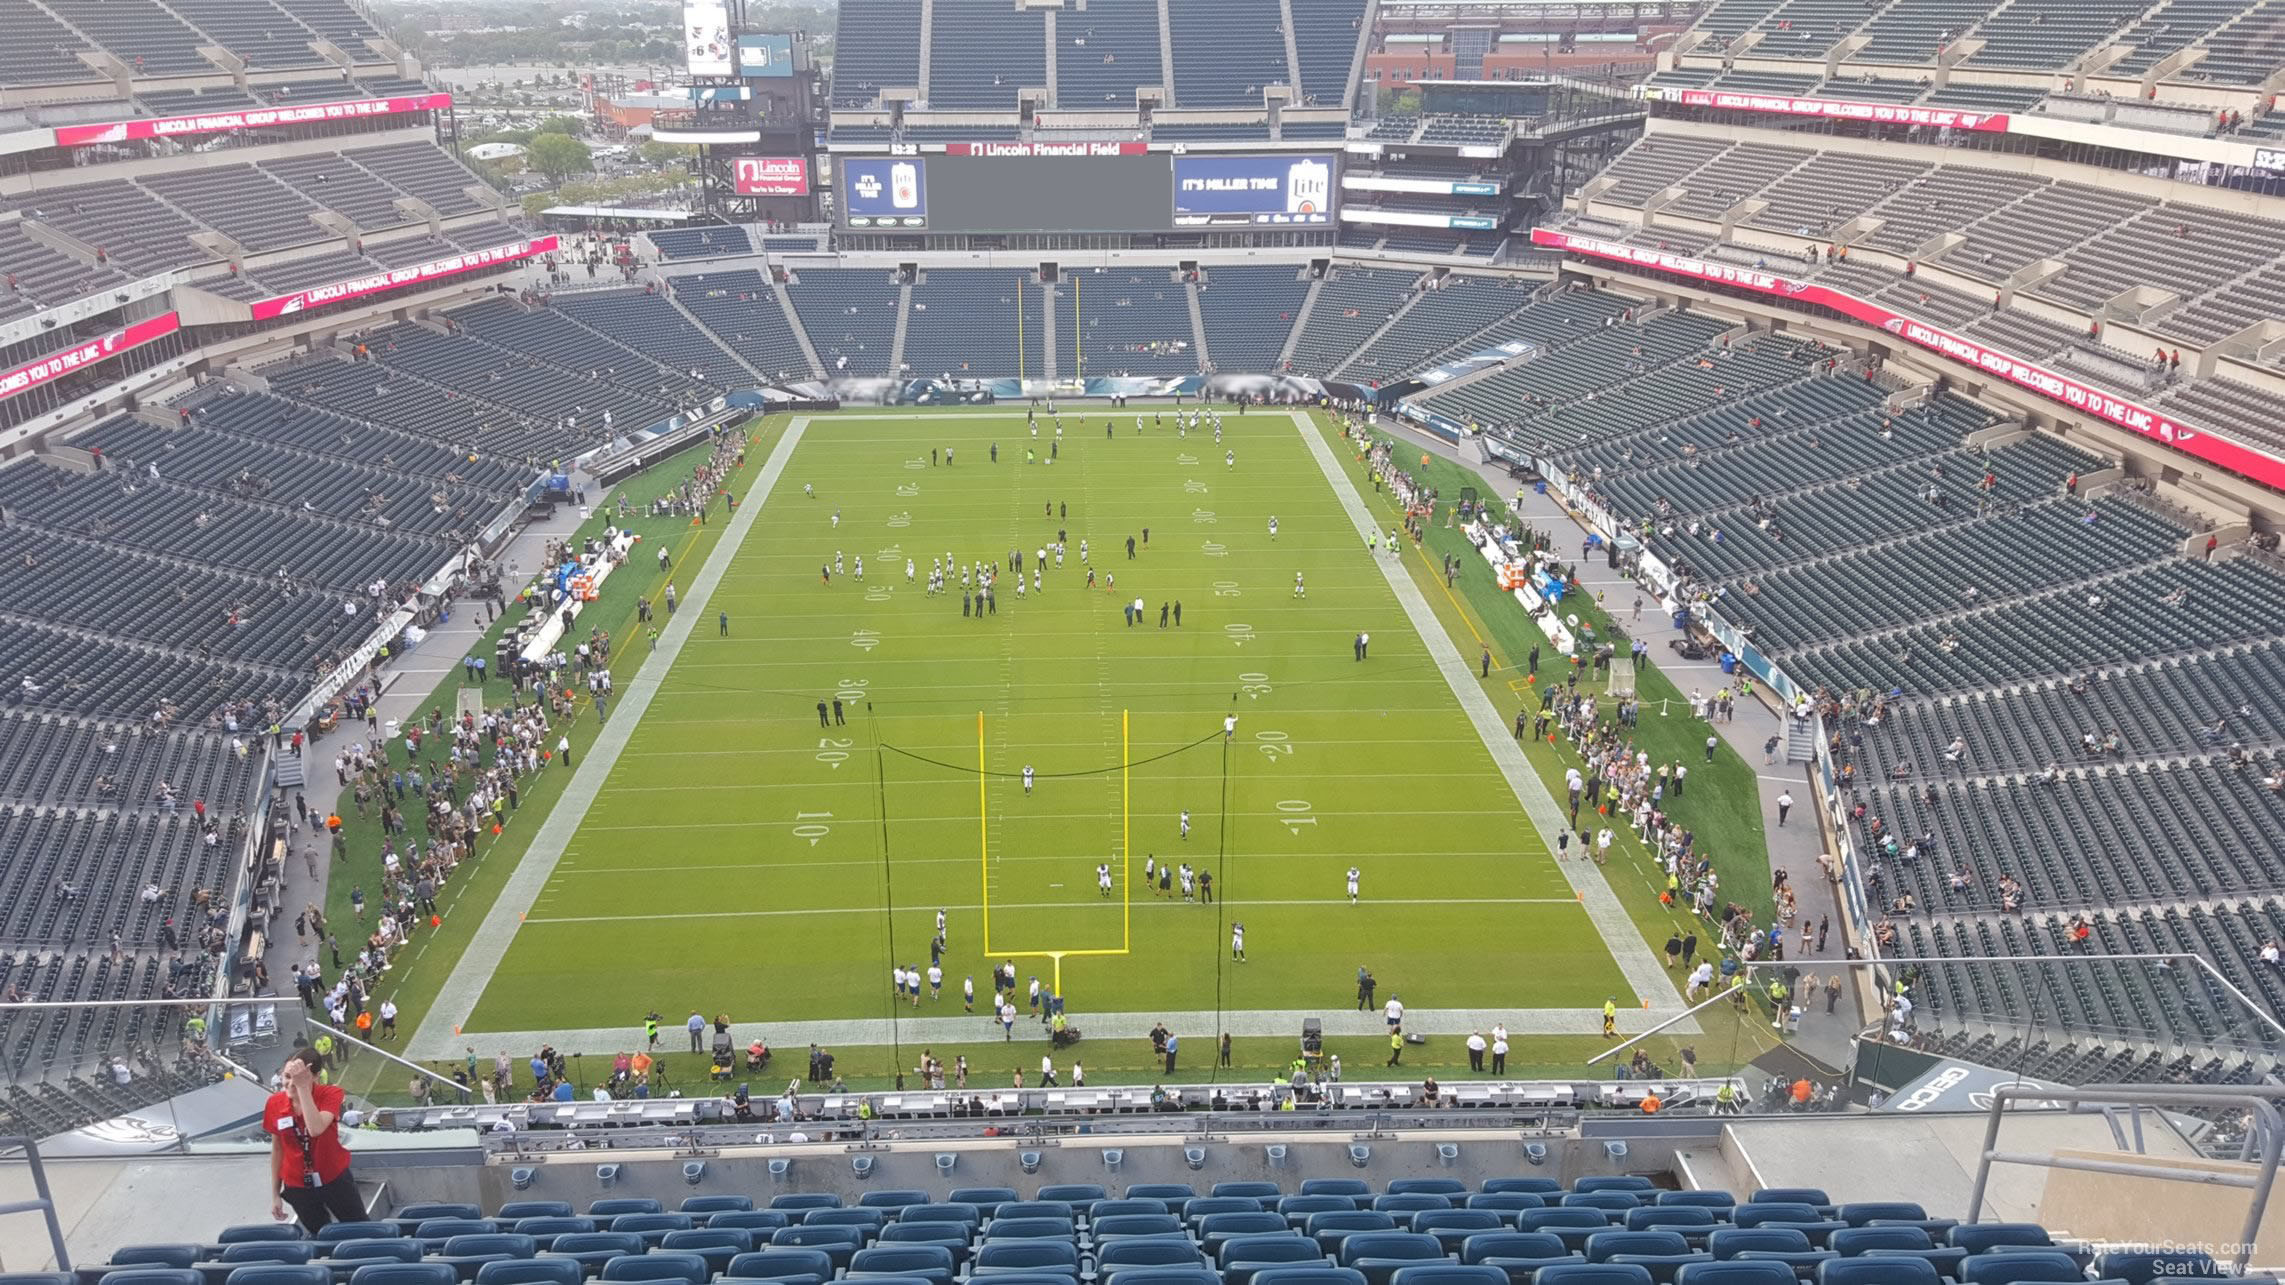 section 212, row 15 seat view  for football - lincoln financial field